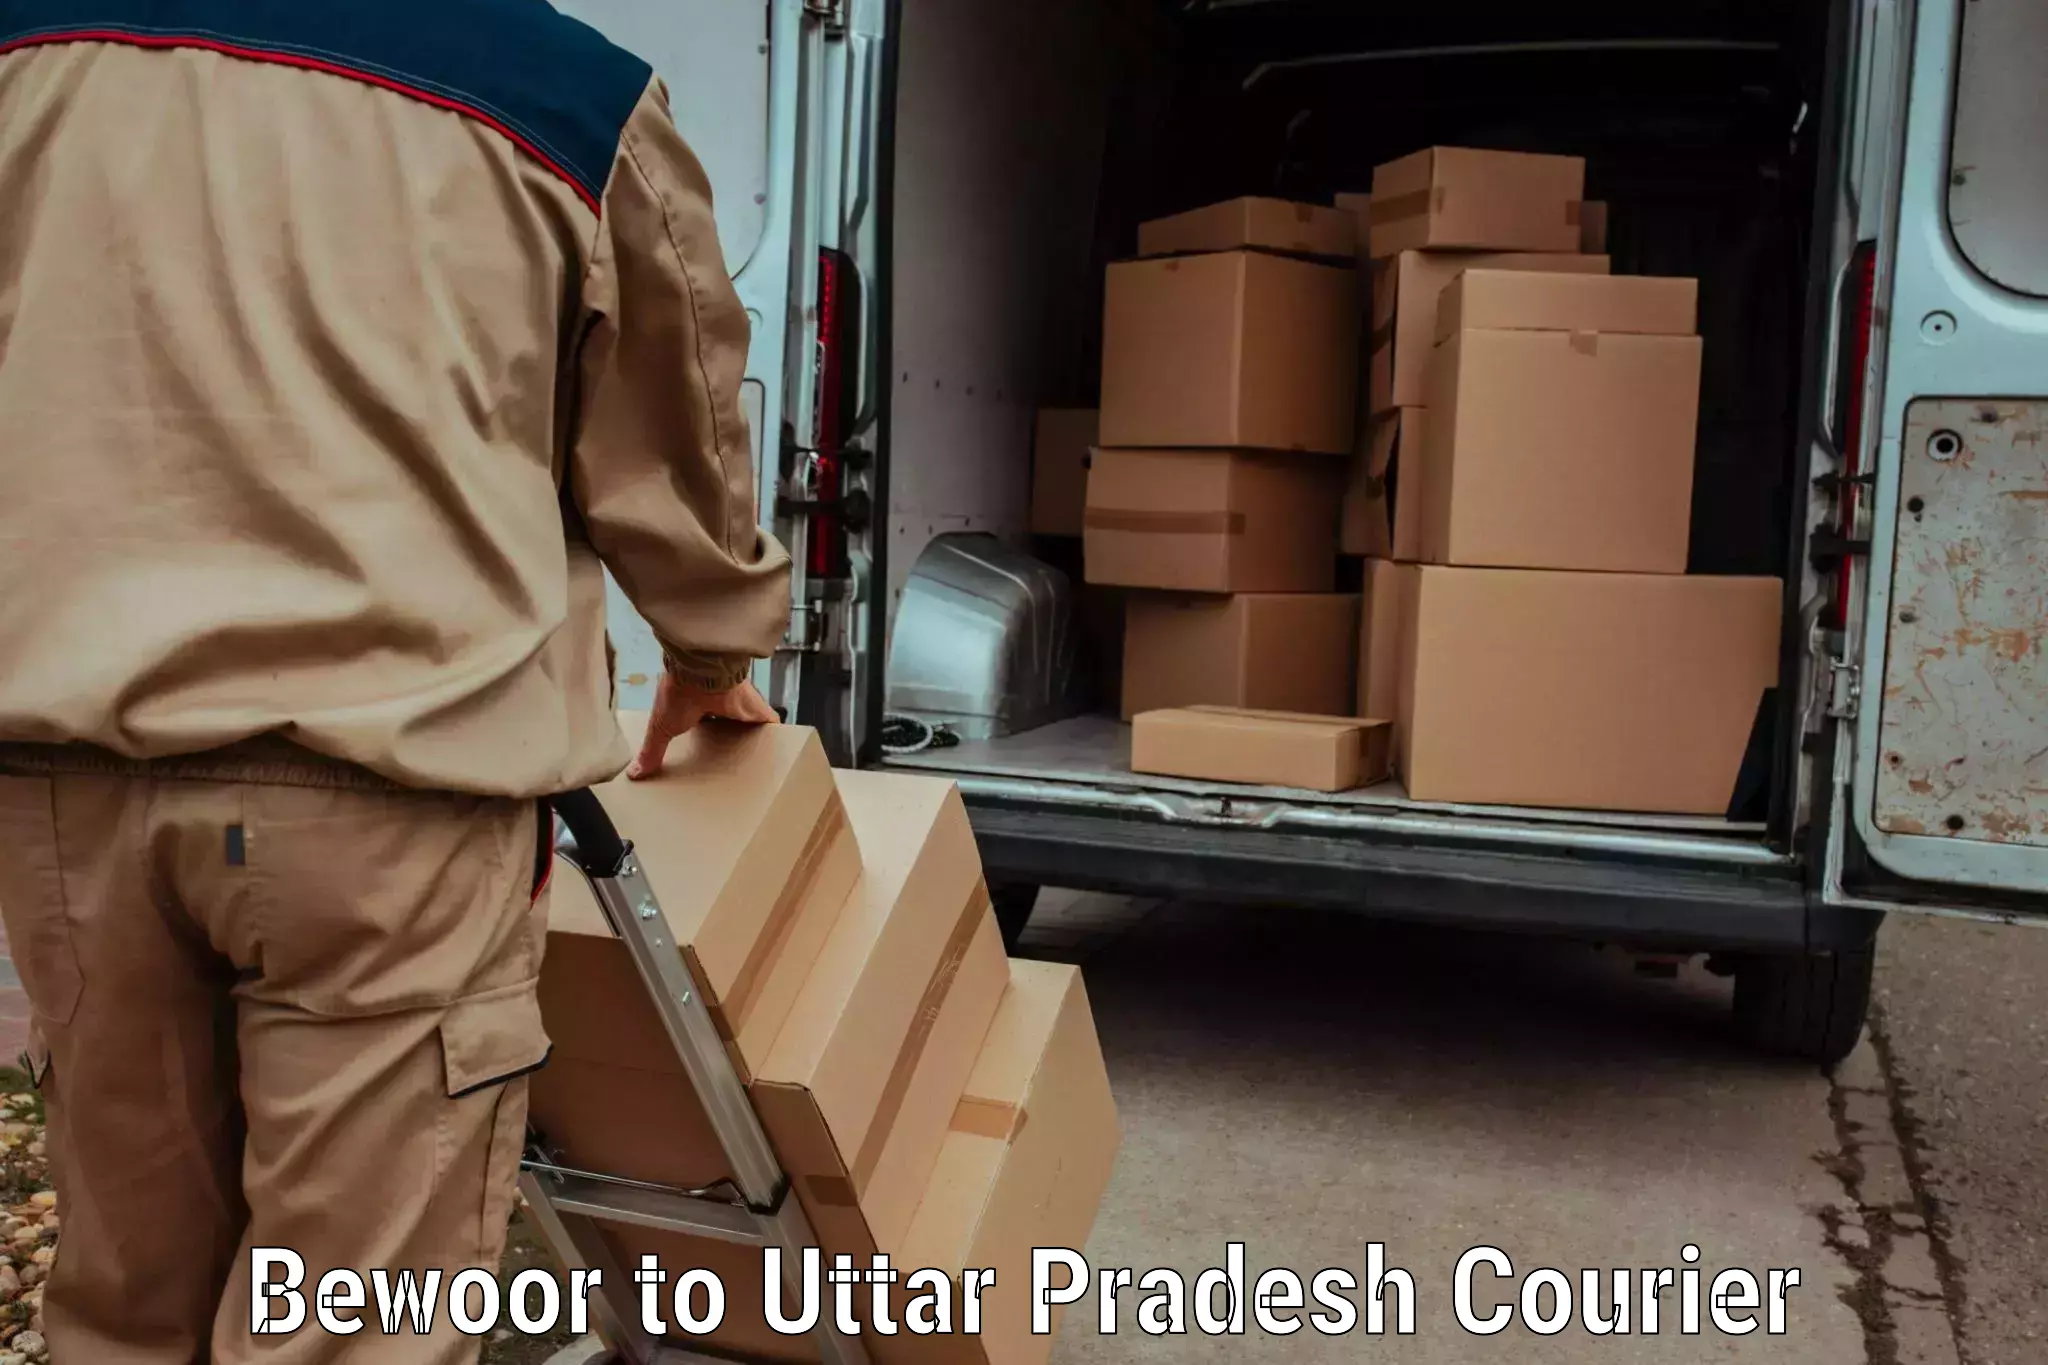 Courier insurance Bewoor to Shahjahanpur